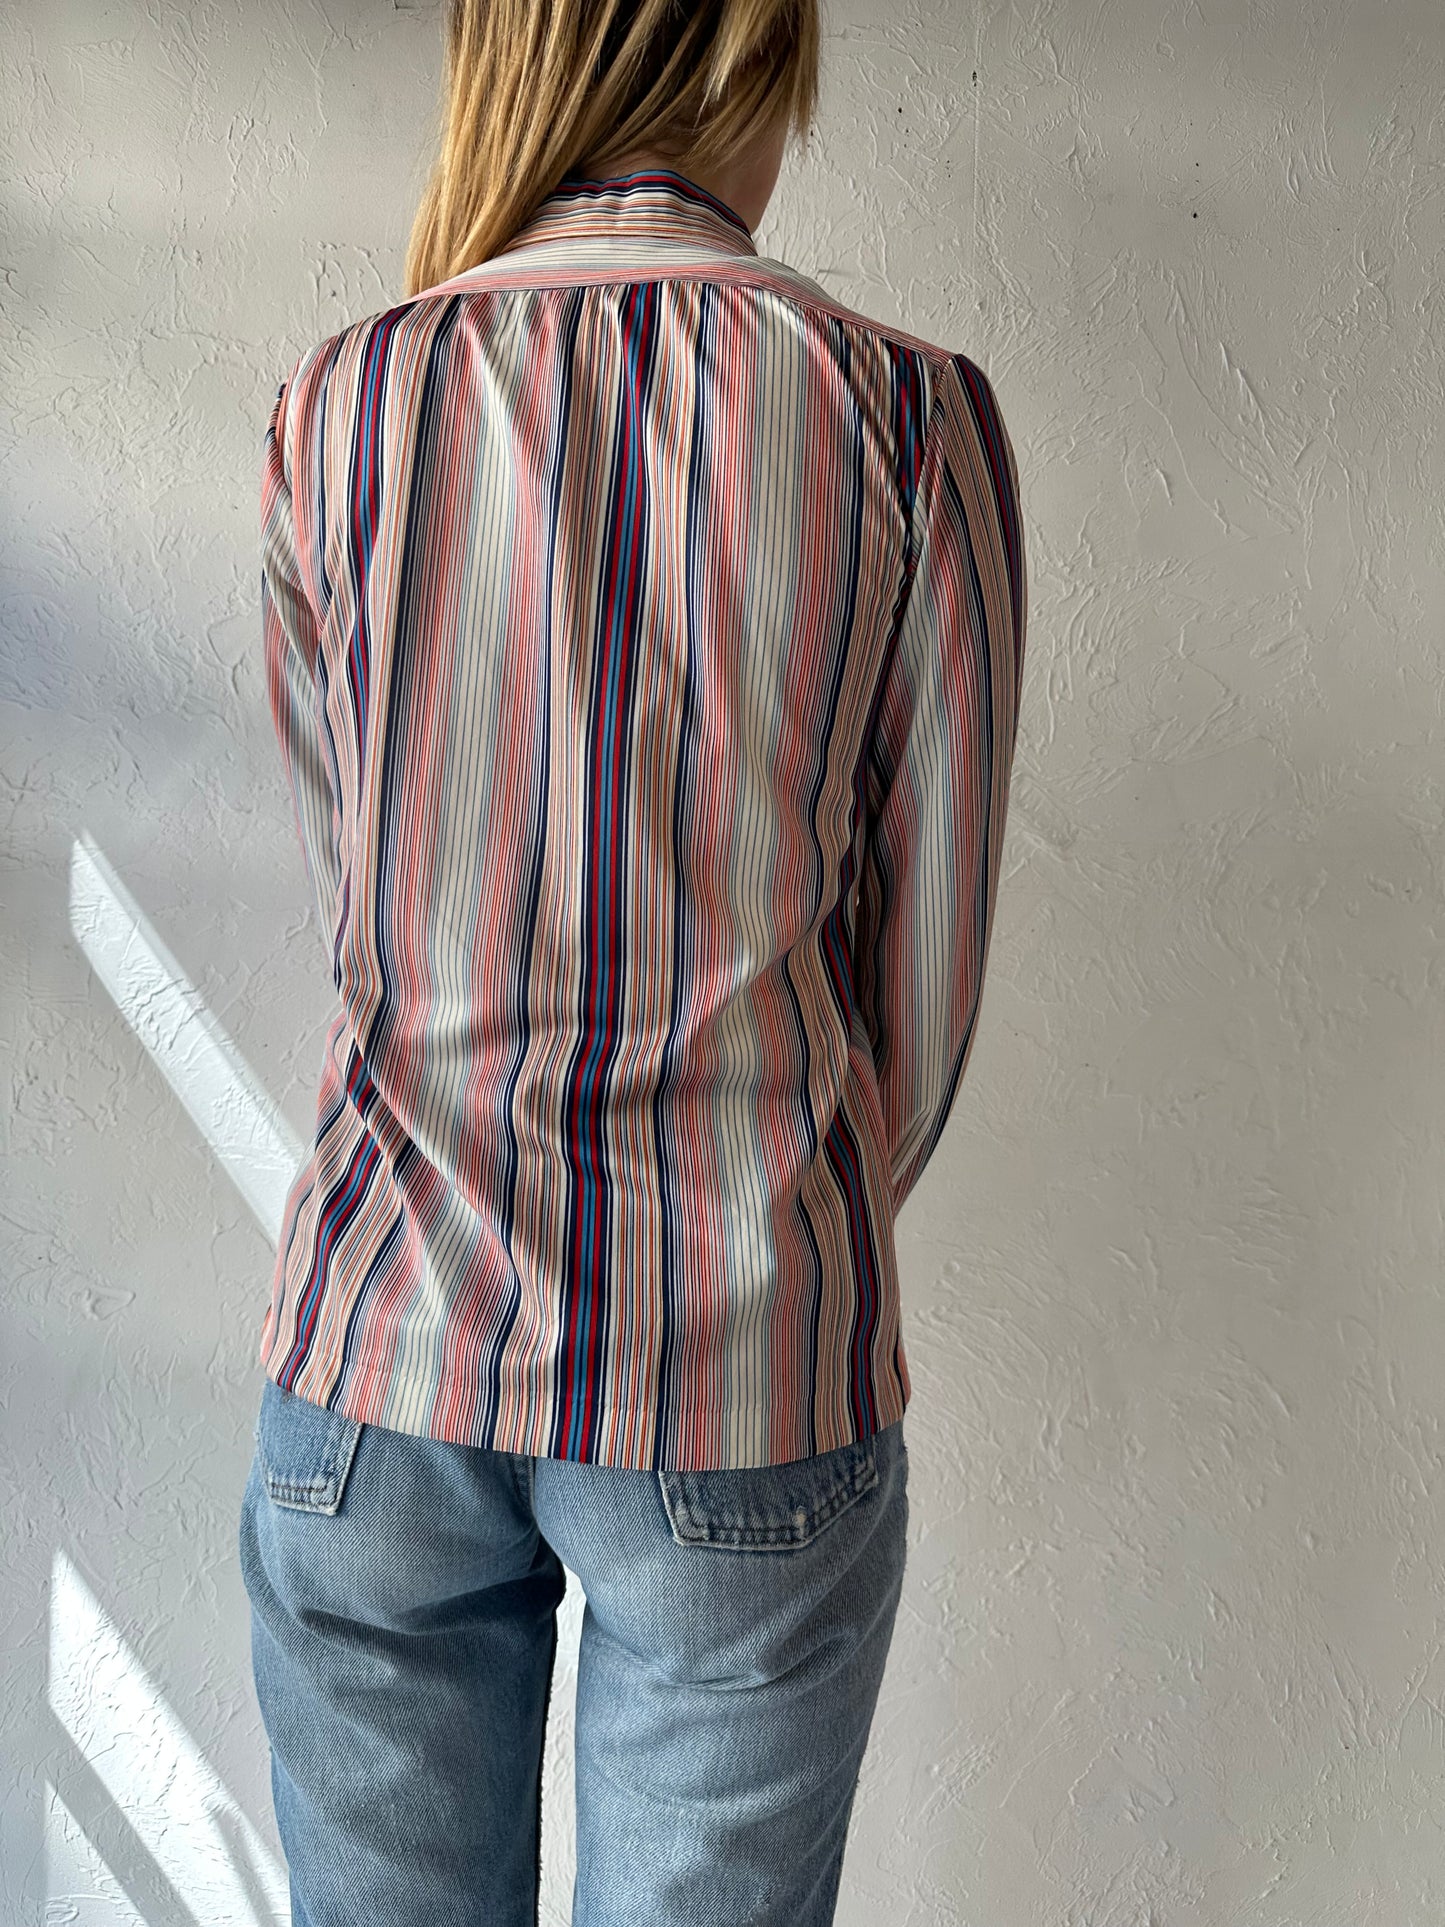 70s 'Collage' Striped Blouse / Small